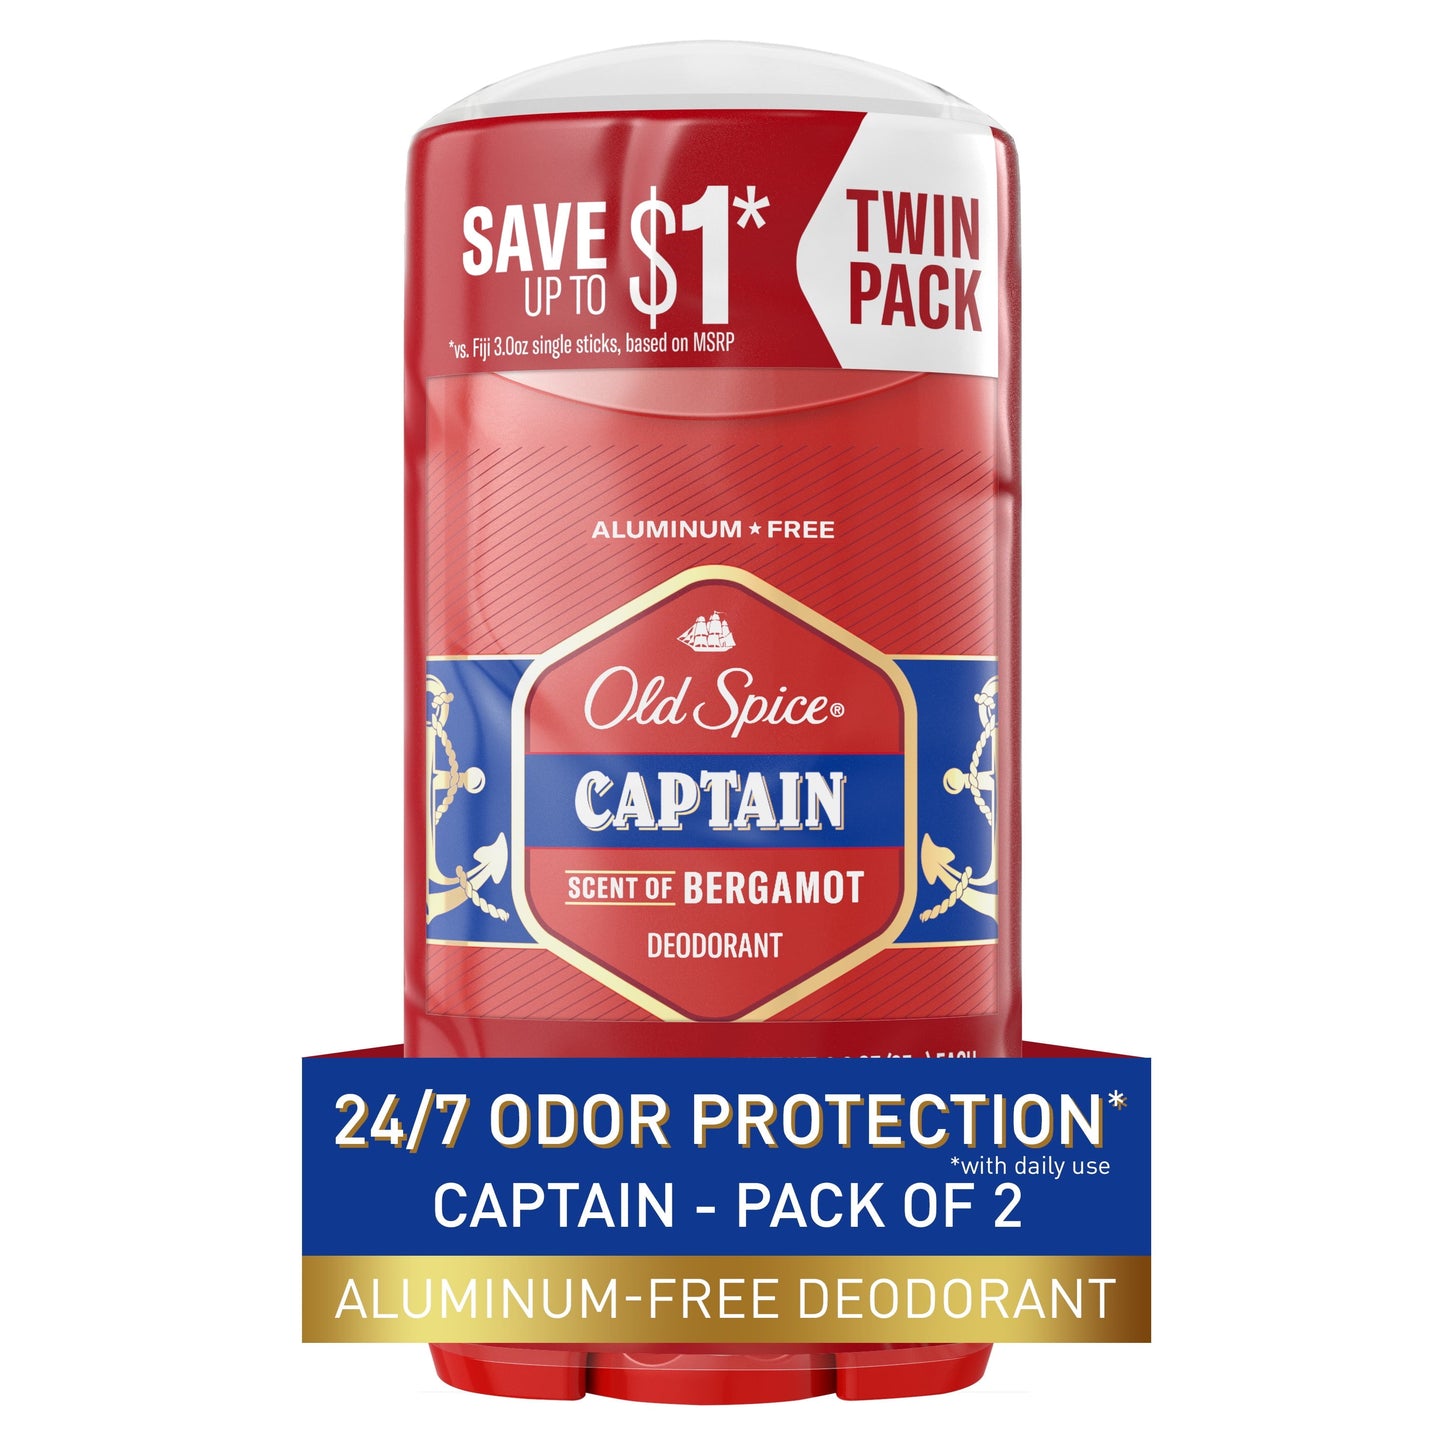 Old Spice Red Collection Deodorant Stick for Men, Captain Scent, 3.0 oz, Twin Pack